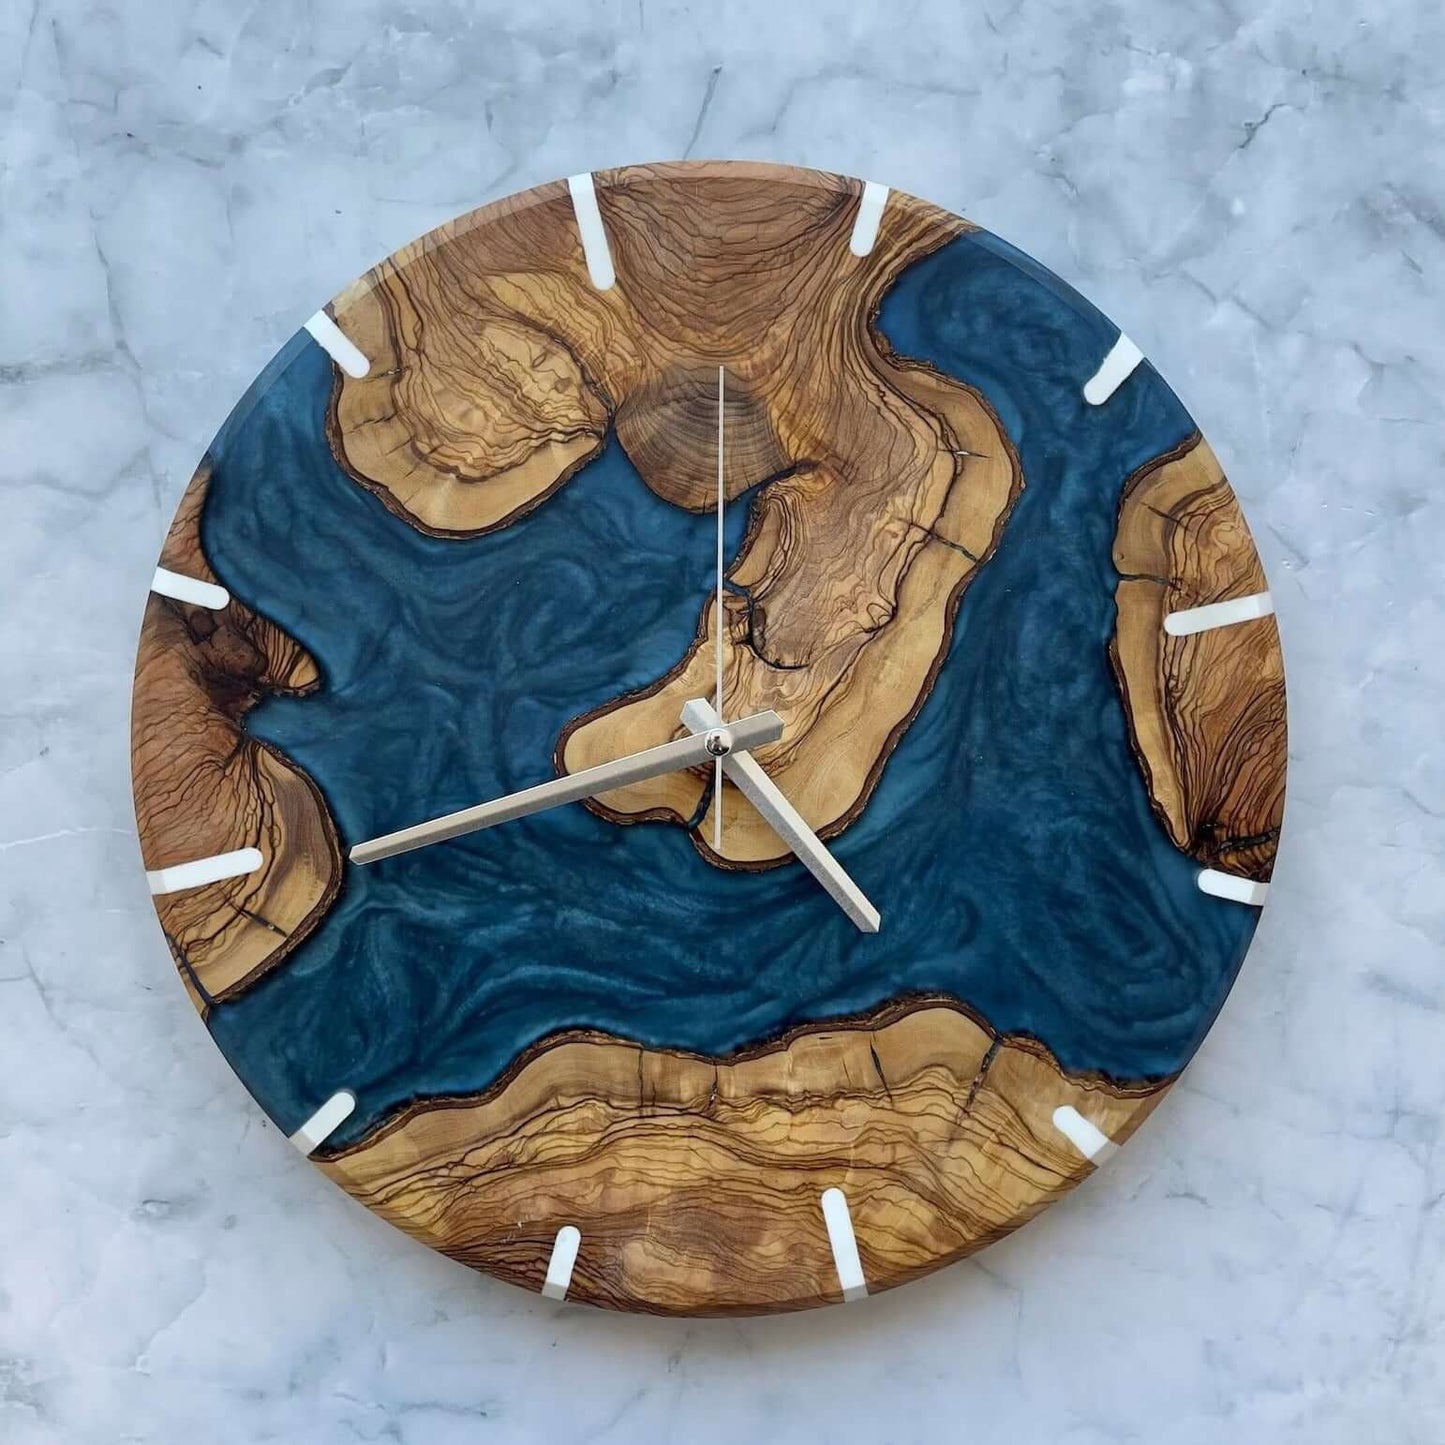 Dark Blue and Wooden Abstract Epoxy Resin Wall Clock For Home Decor-0